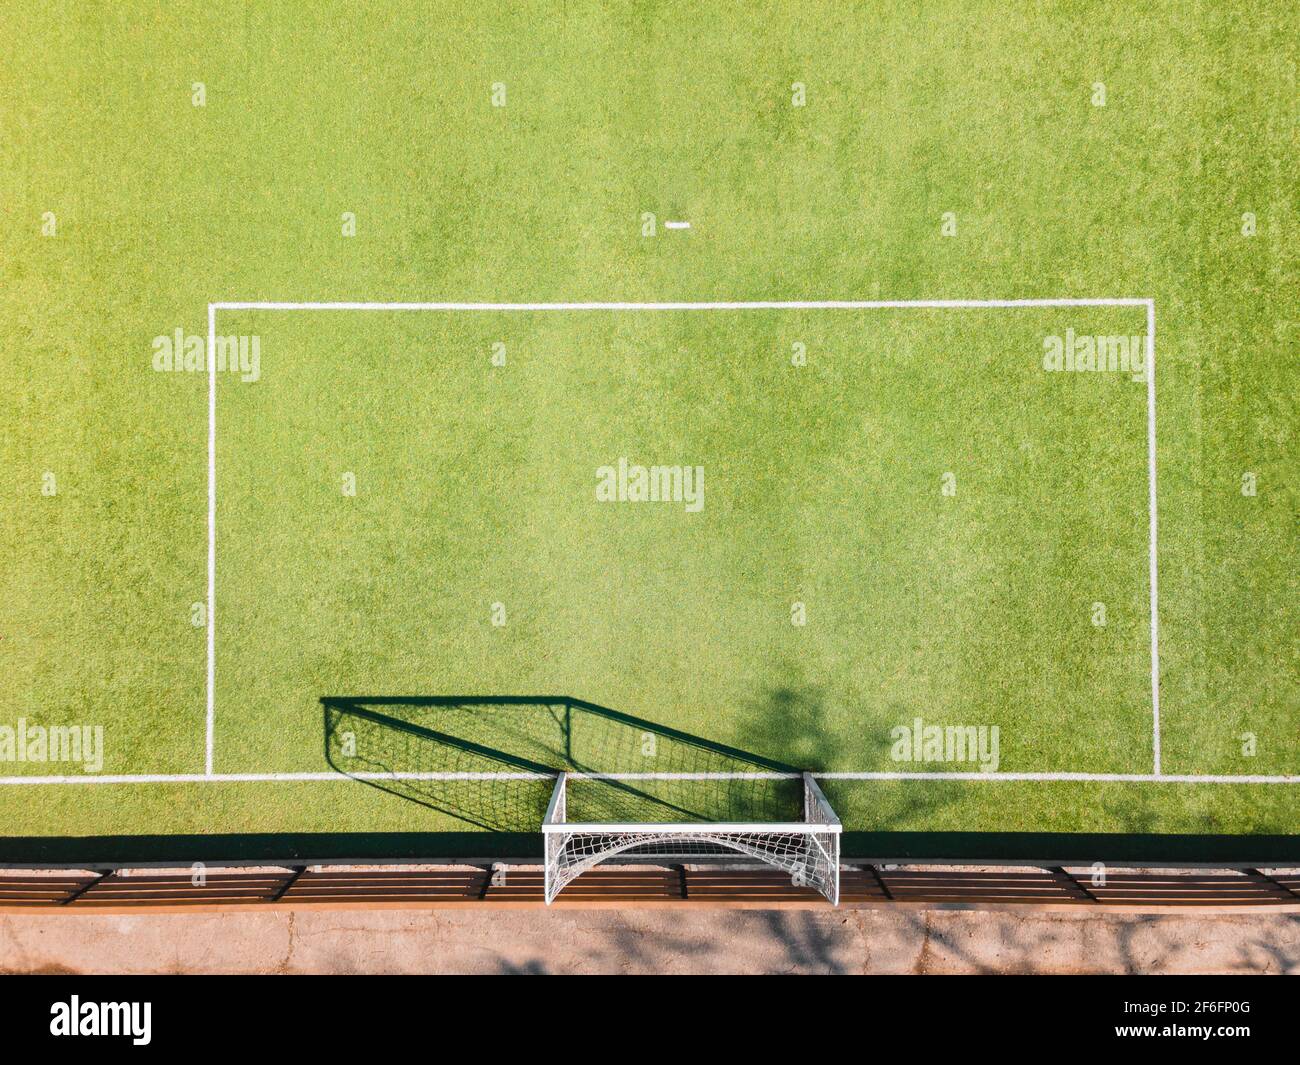 Soccer Ground Detail. Outdoor sport ground with green surface for playing football  or soccer  in urban area, detail, drone view Stock Photo